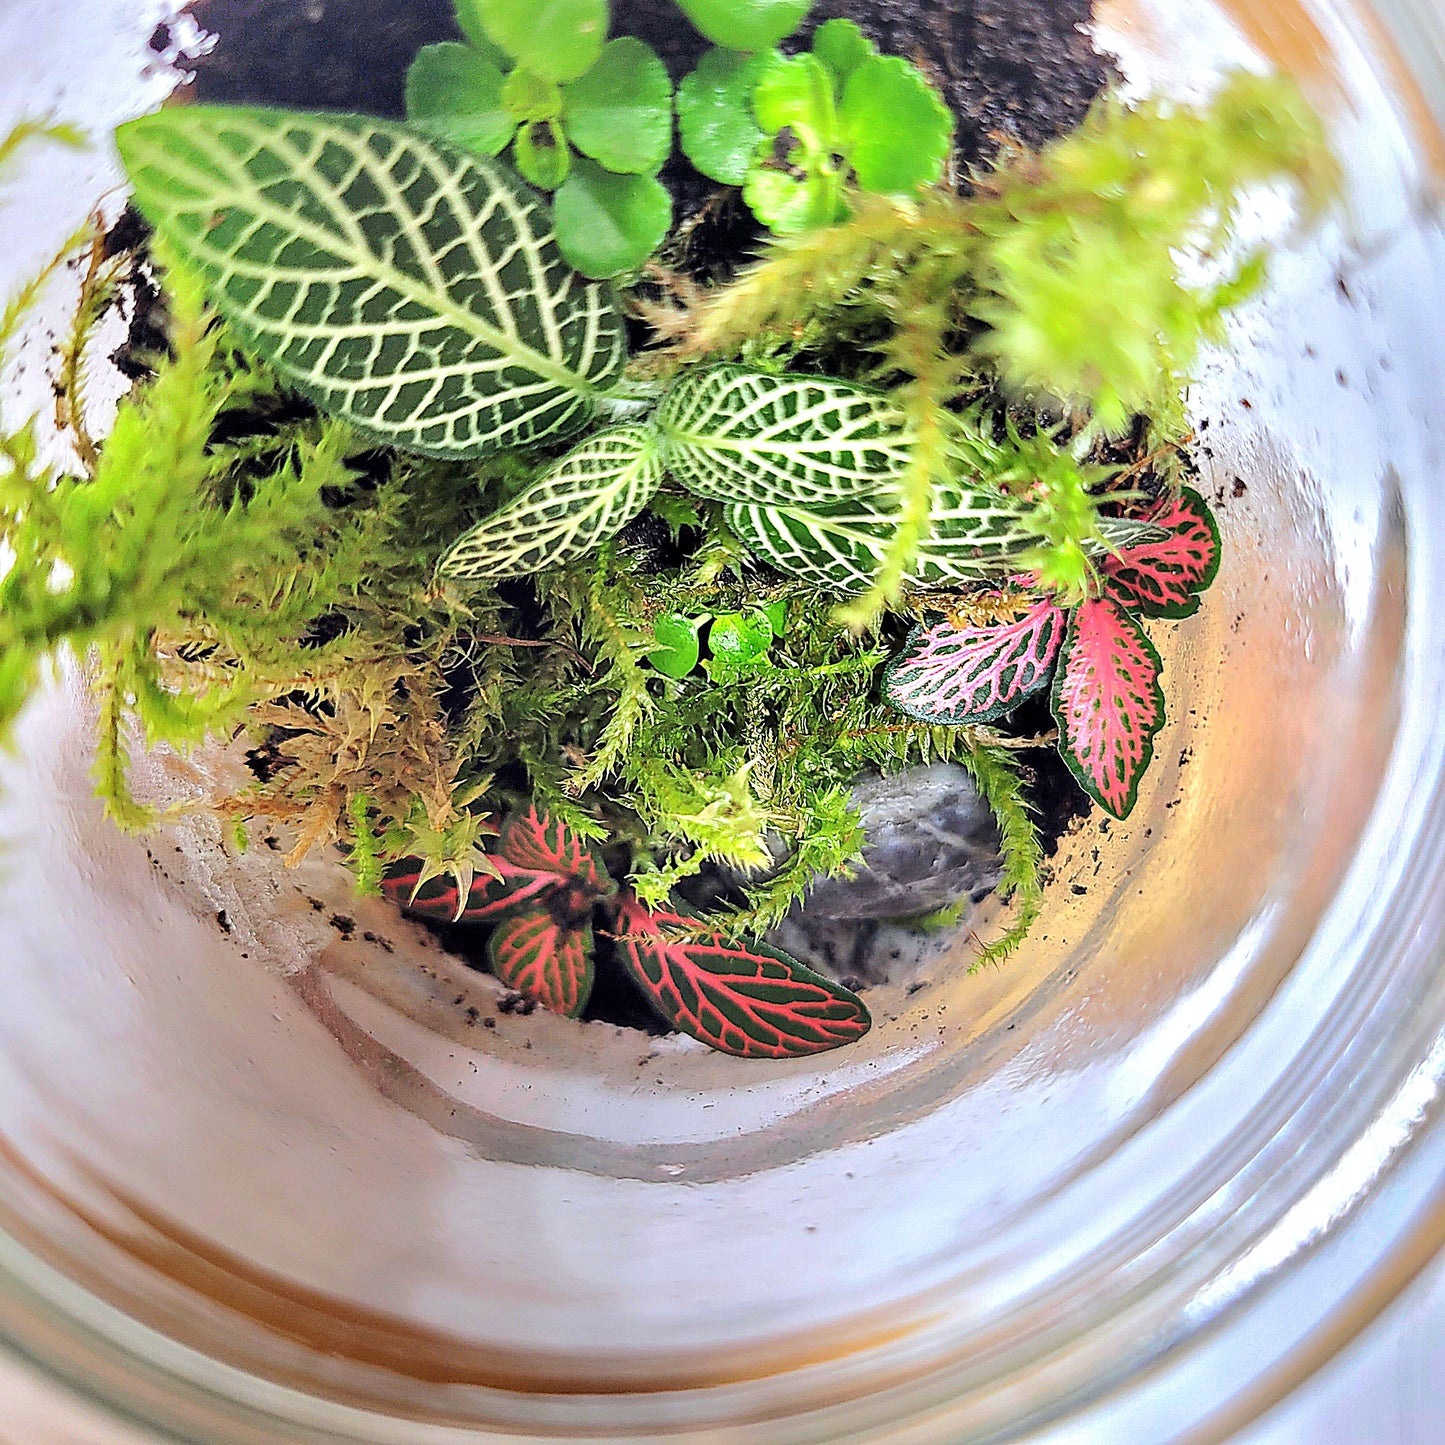 Top view of the mossy terrarium.